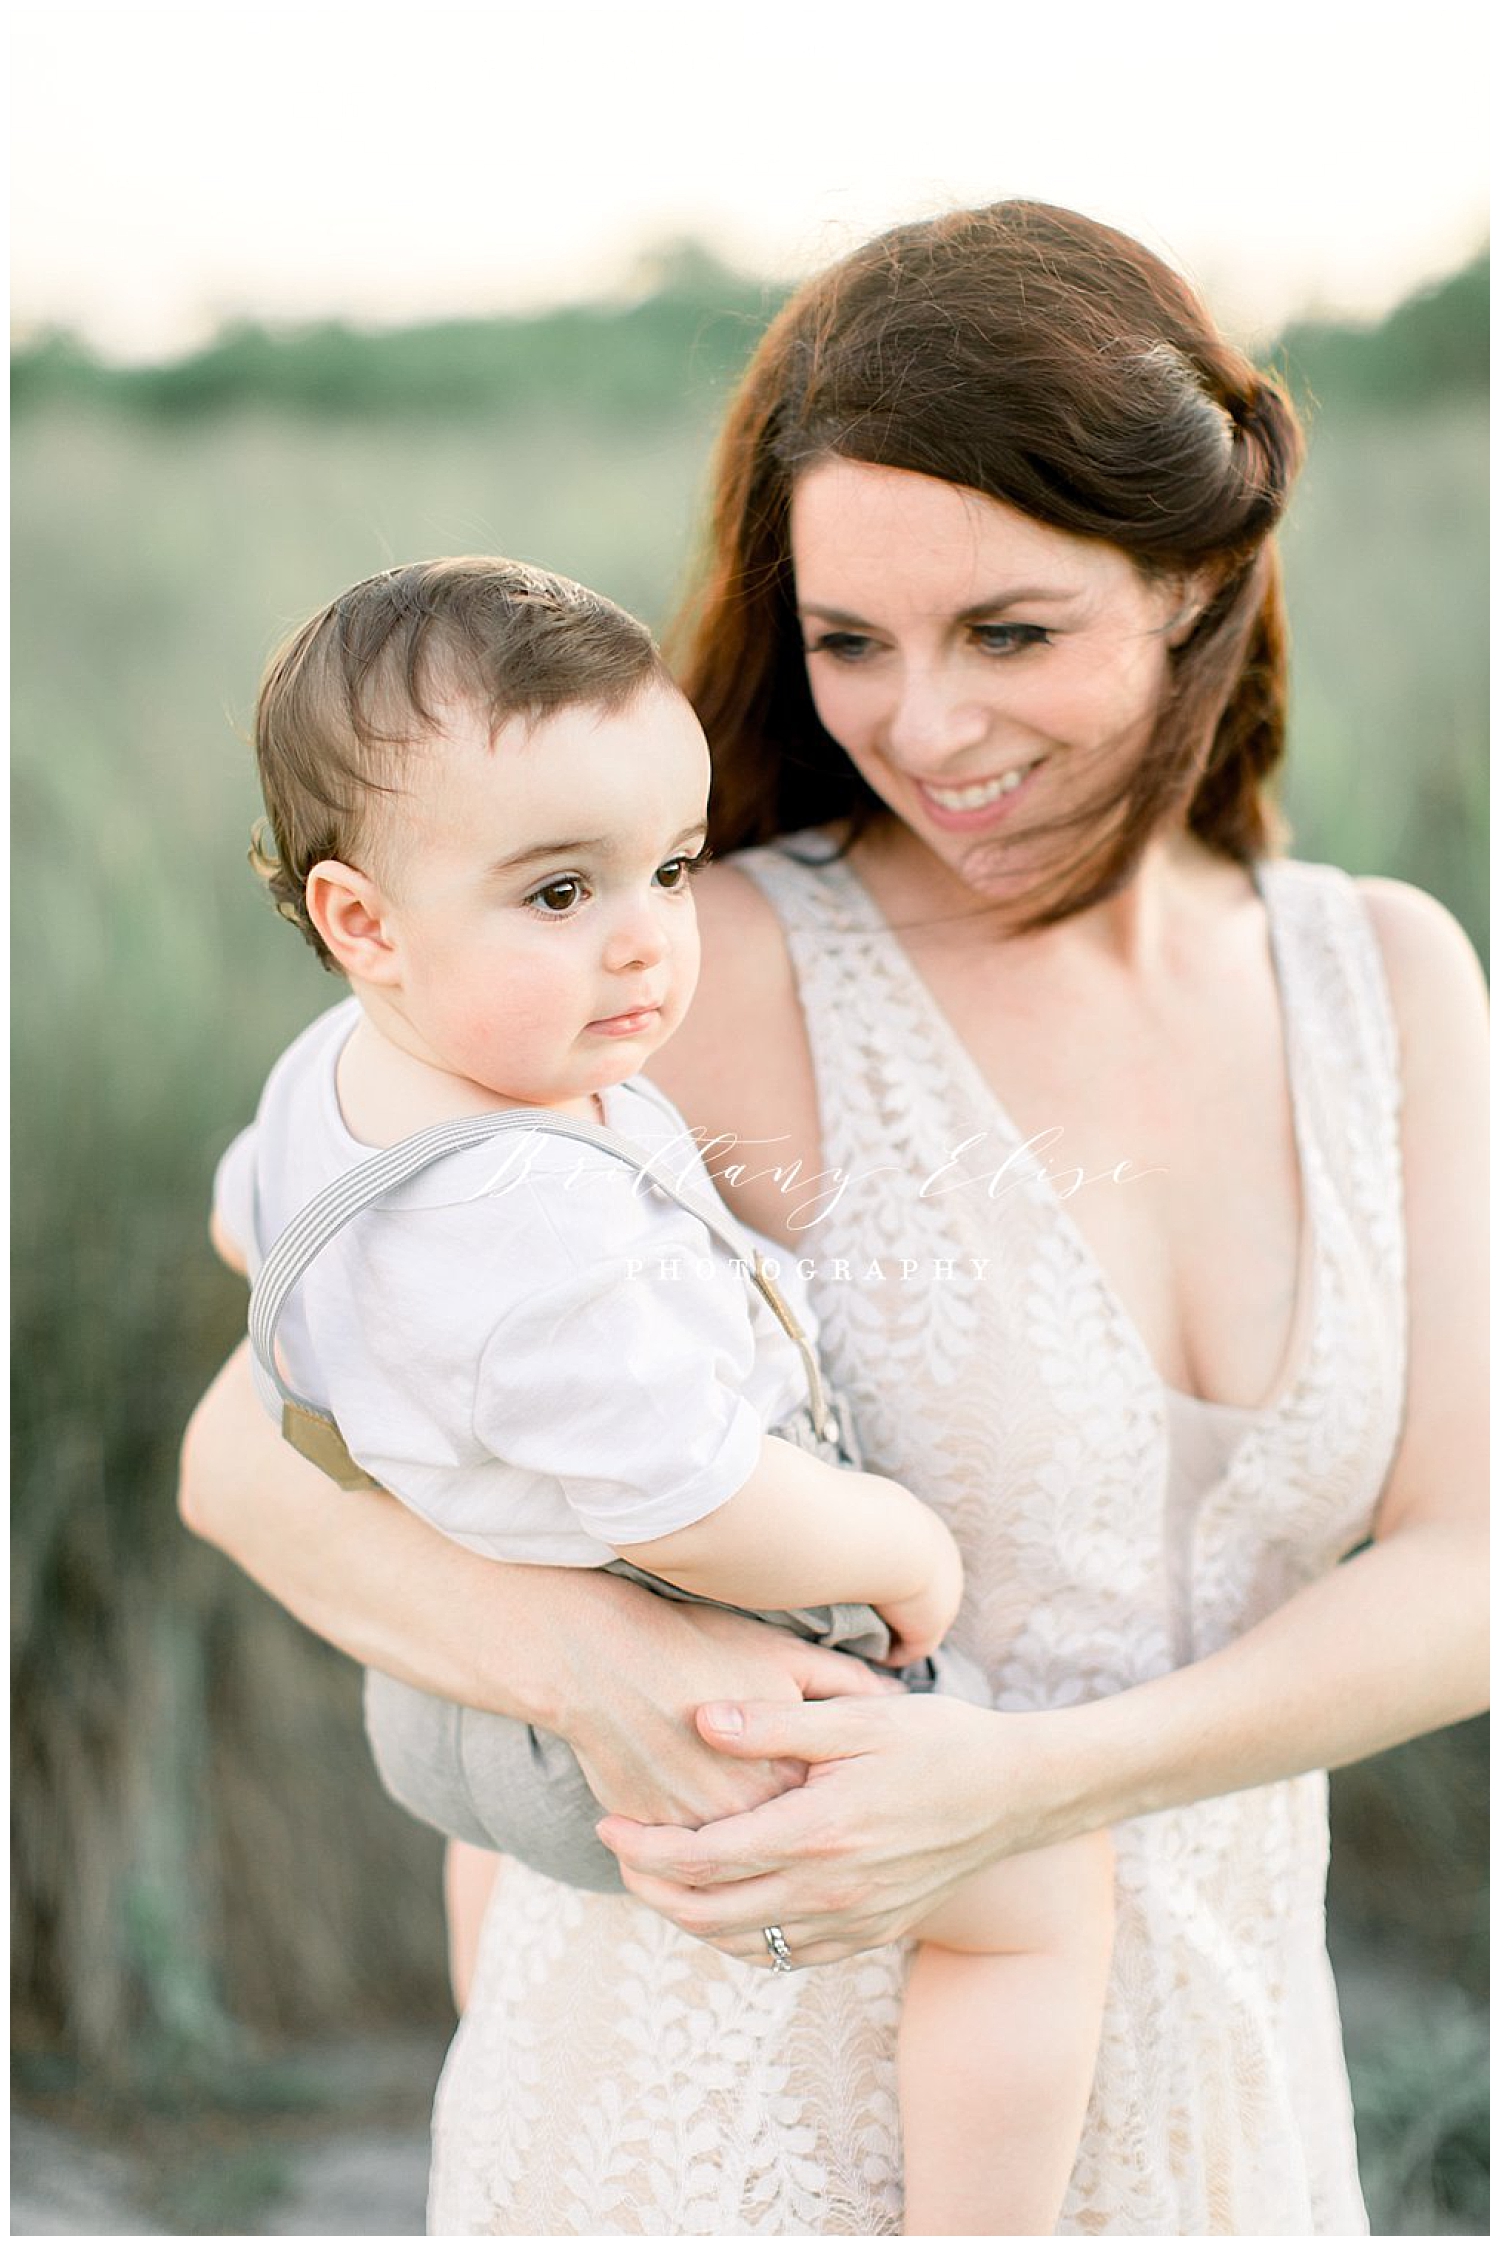 Tampa First Birthday Family Portrait Session